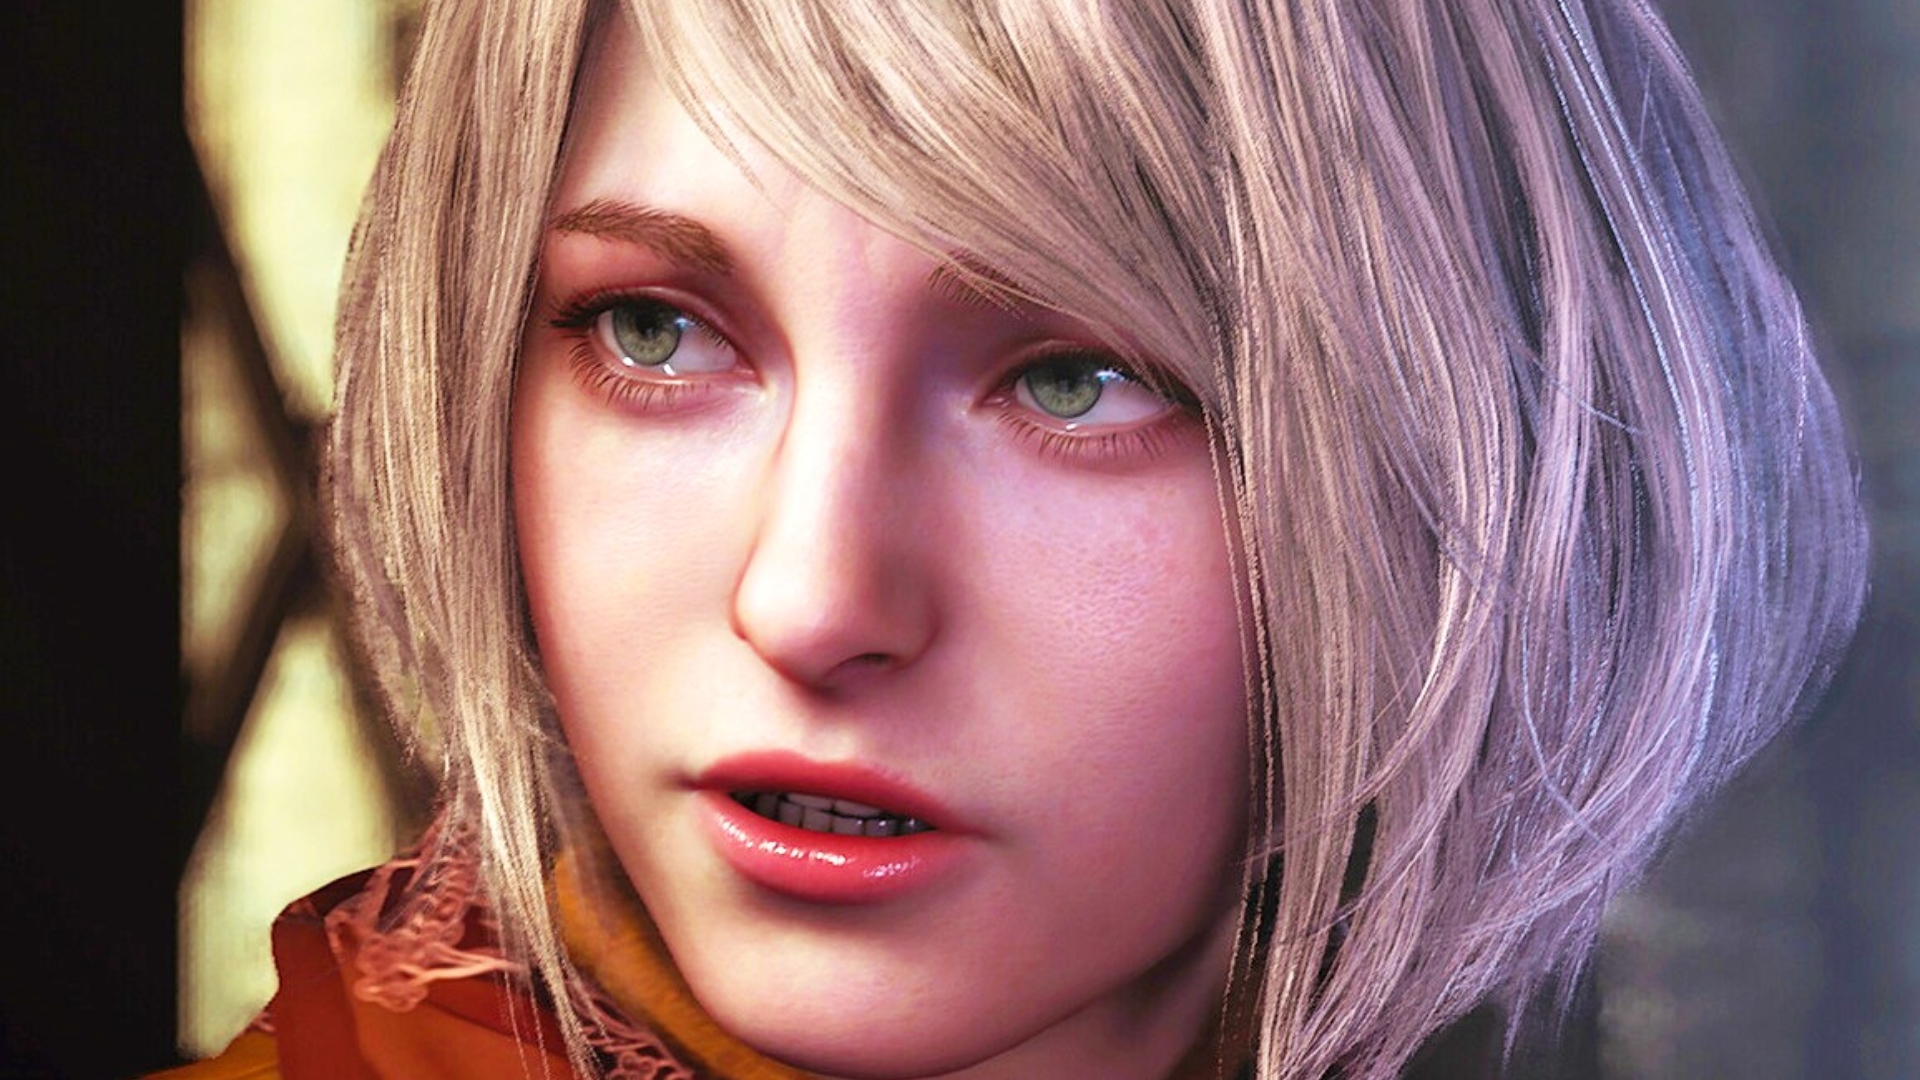 Resident Evil 4 Remake makes Ashley's character a lot better